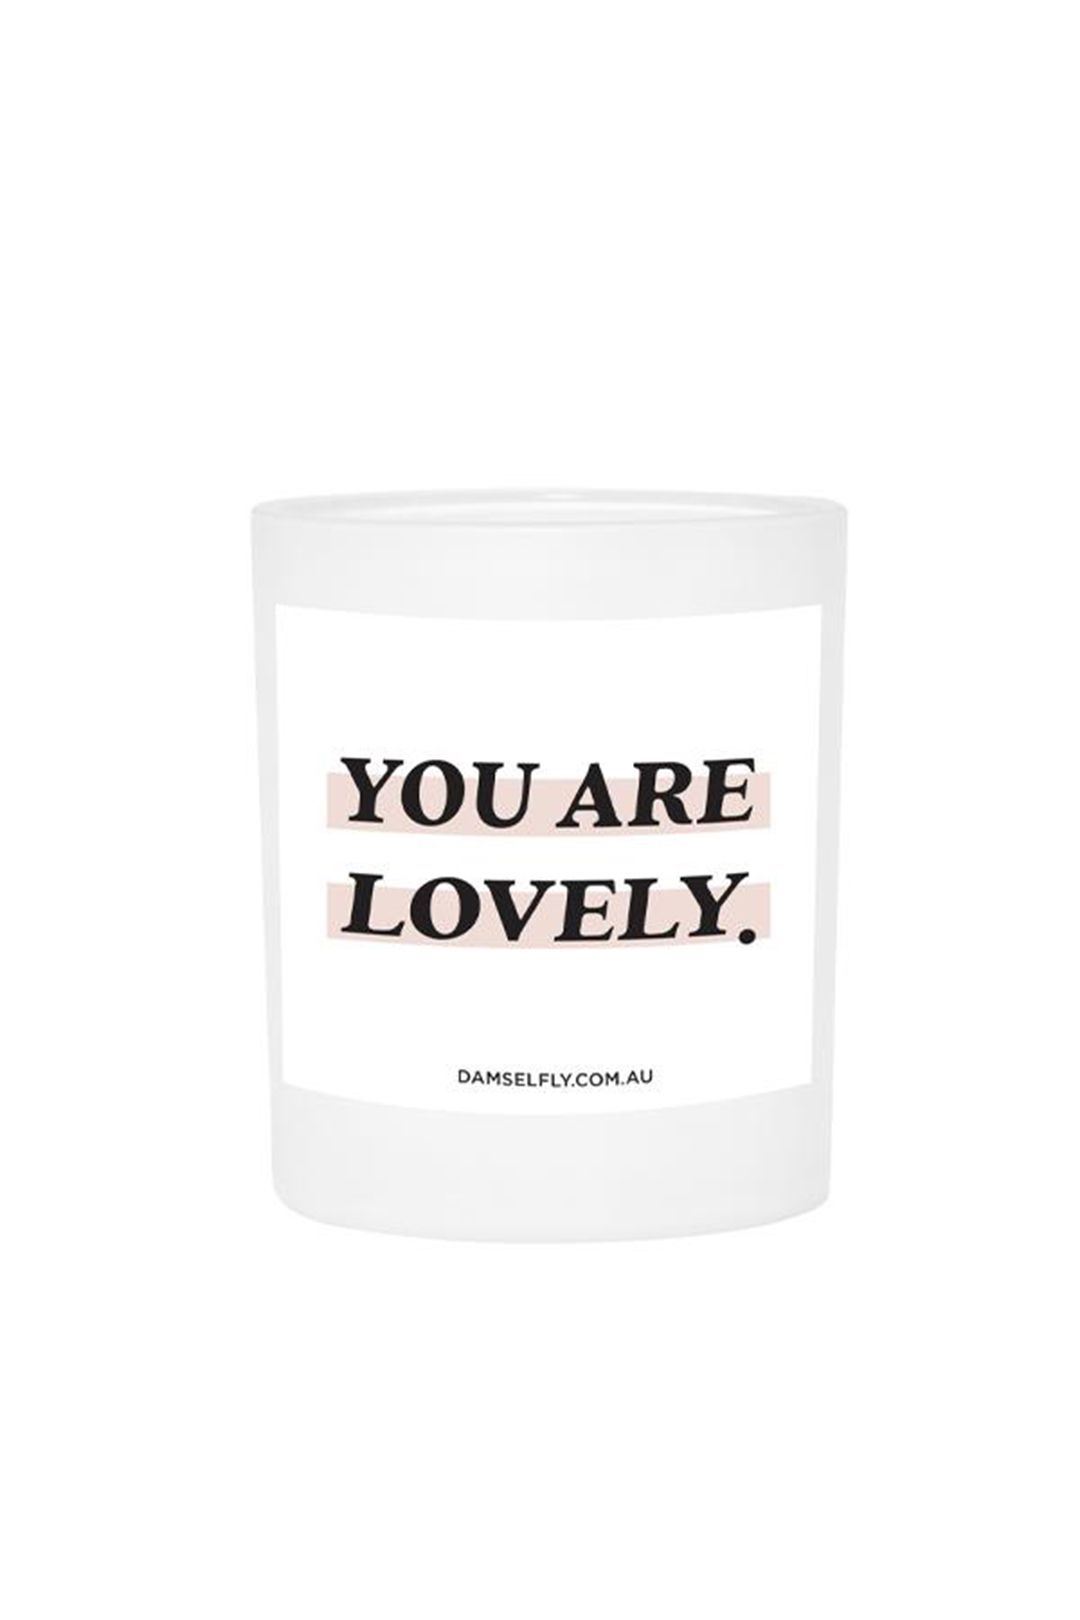 damselfly-collective-you-are-lovely-large-candle-front